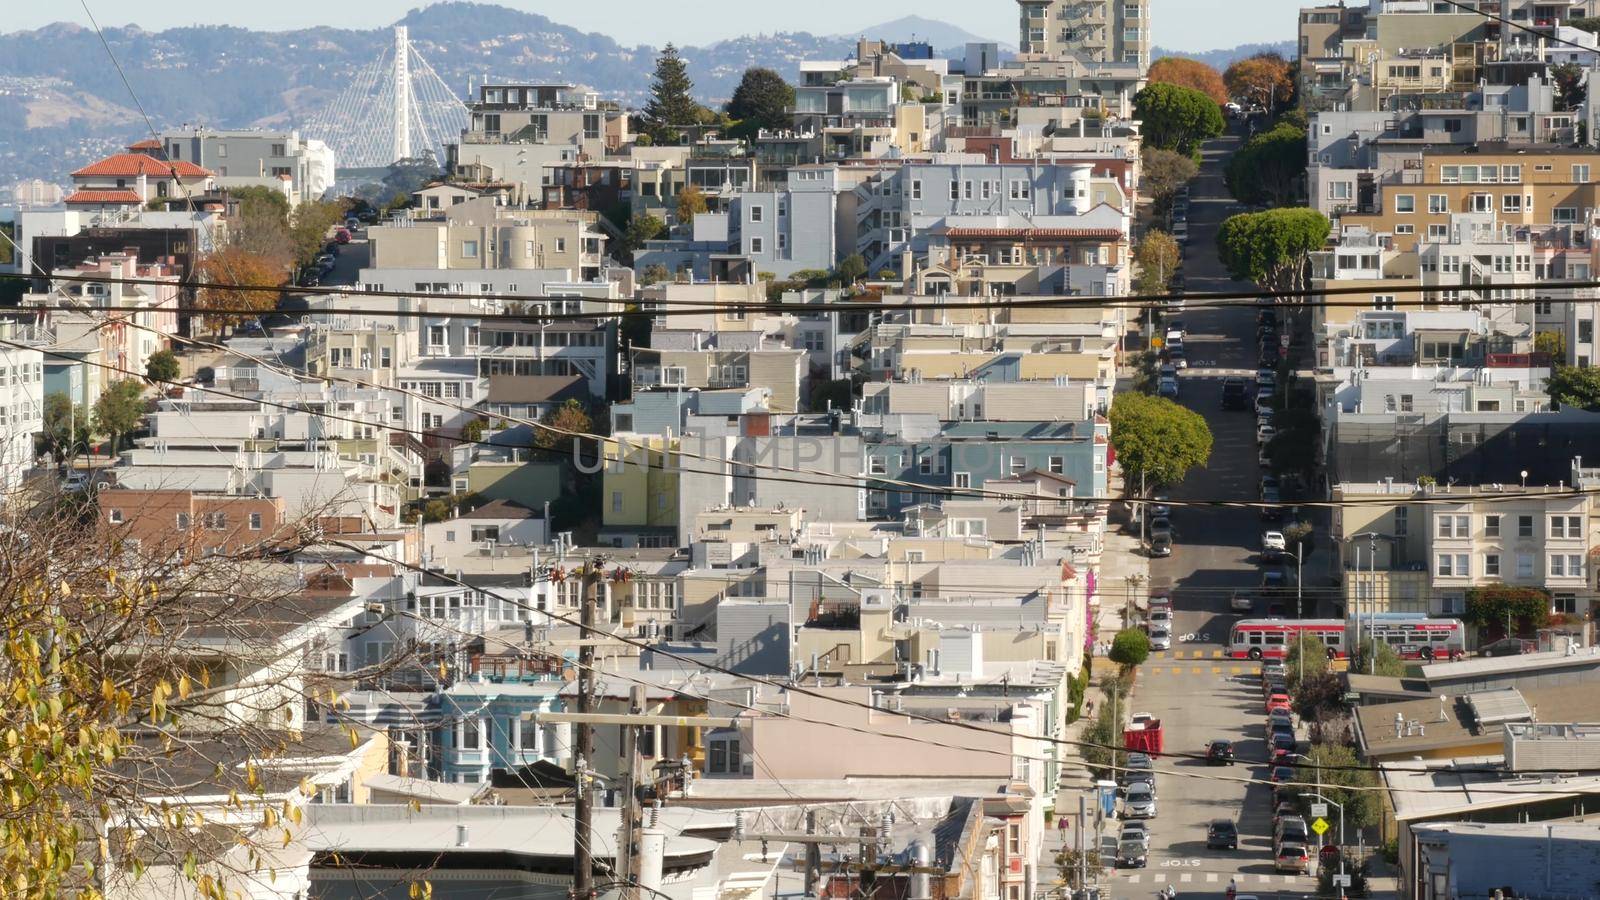 Iconic hilly street and crossroads in San Francisco, Northern California, USA. Steep downhill road and pedestrian walkway. Downtown real estate, victorian townhouses abd other residential buildings.